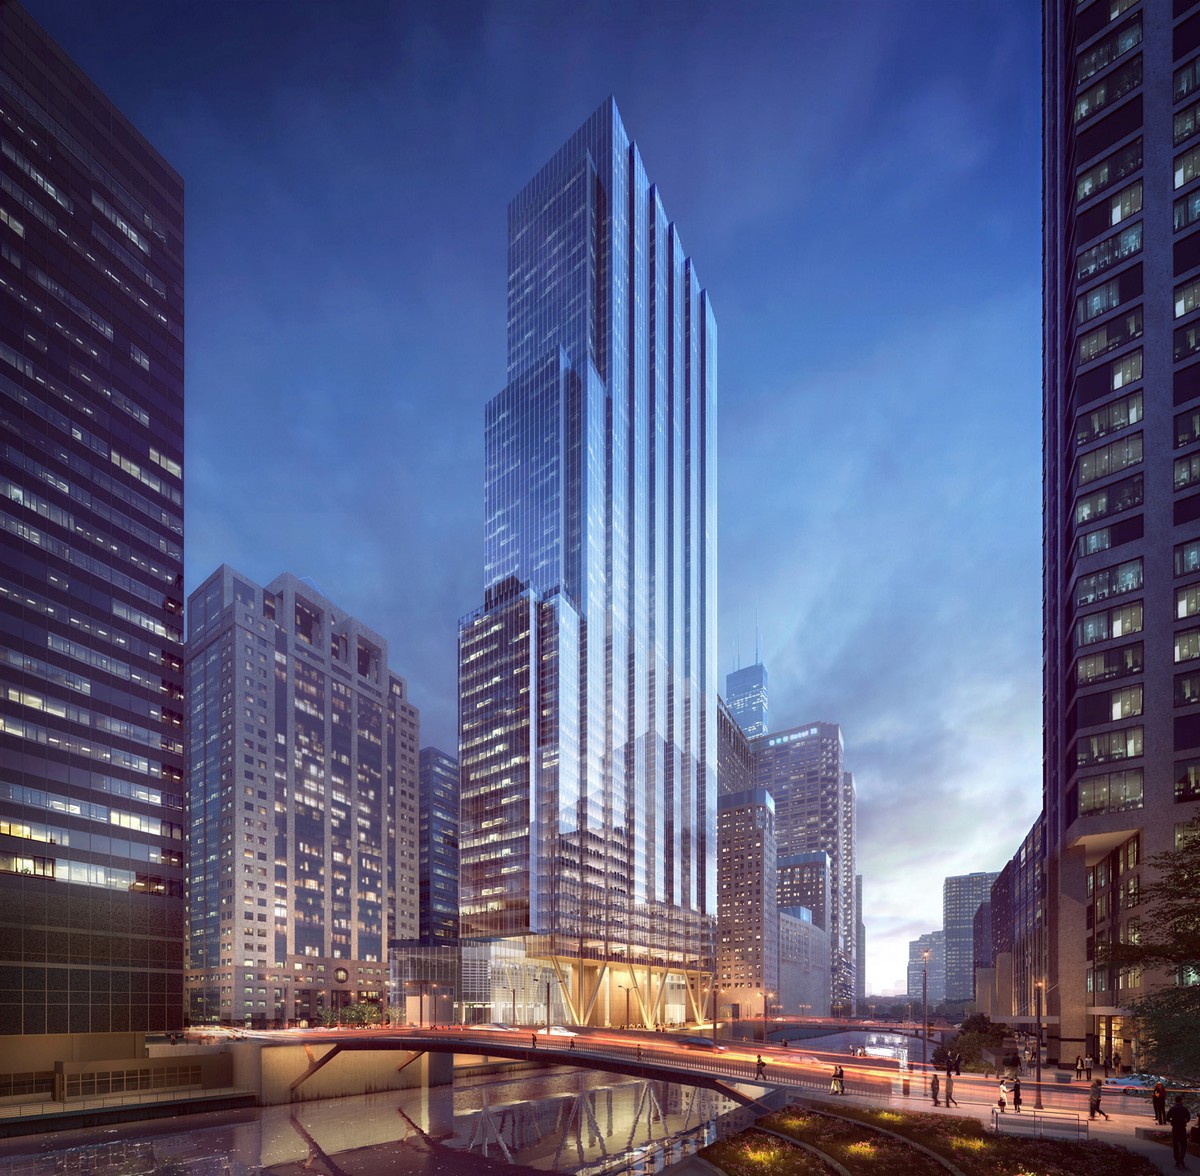 A 51-story Office Tower to be built at 110 North Wacker Drive in Chicago